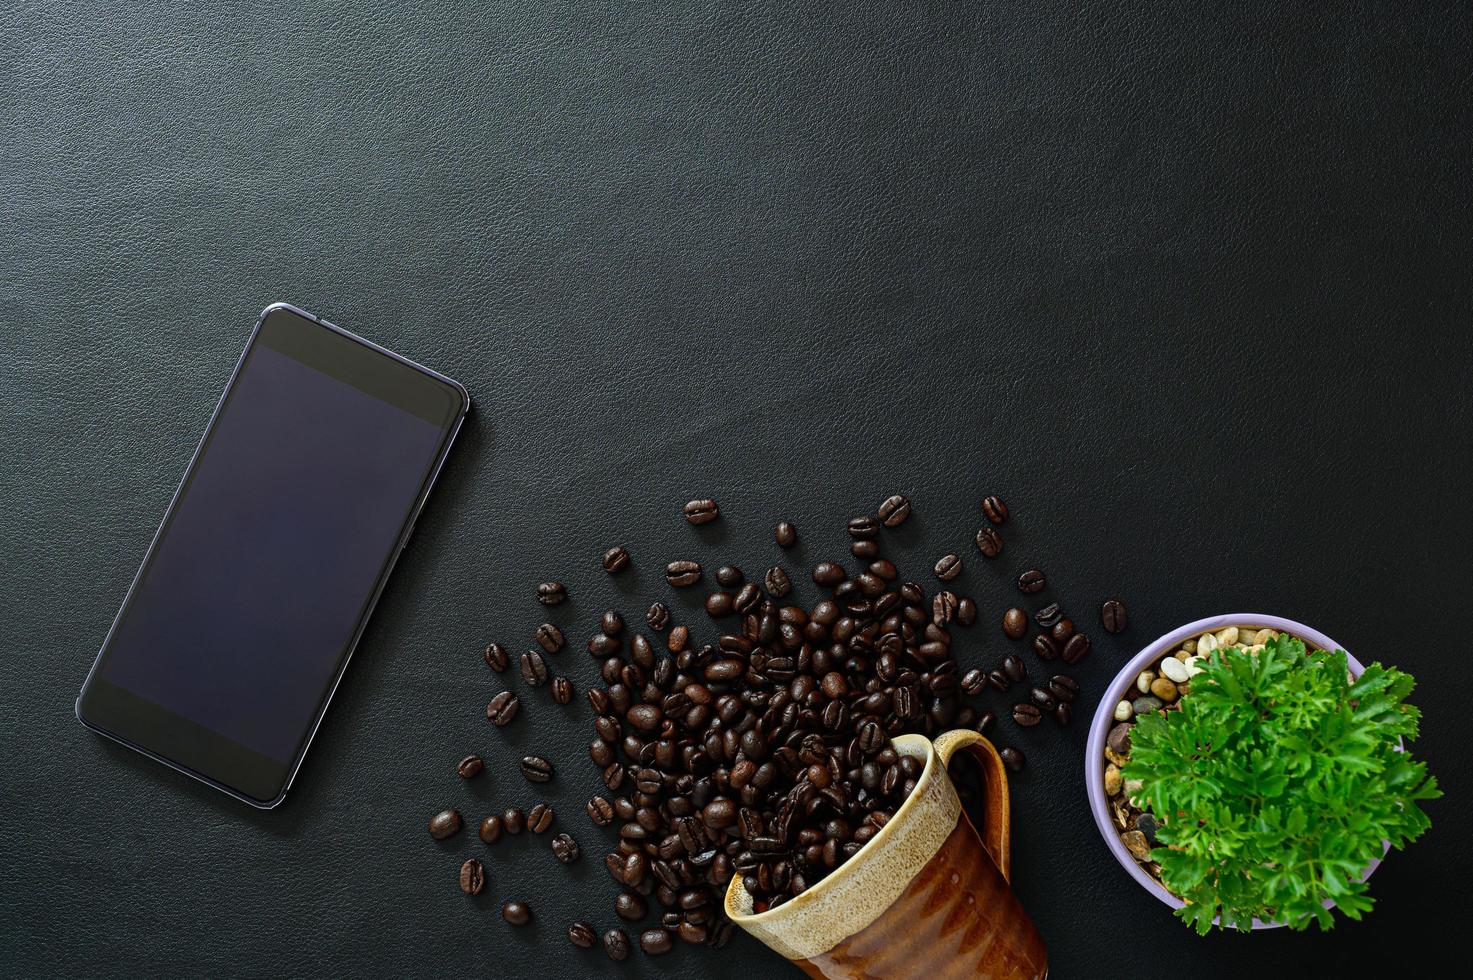 Smartphone and coffee beans on the desk, top view photo